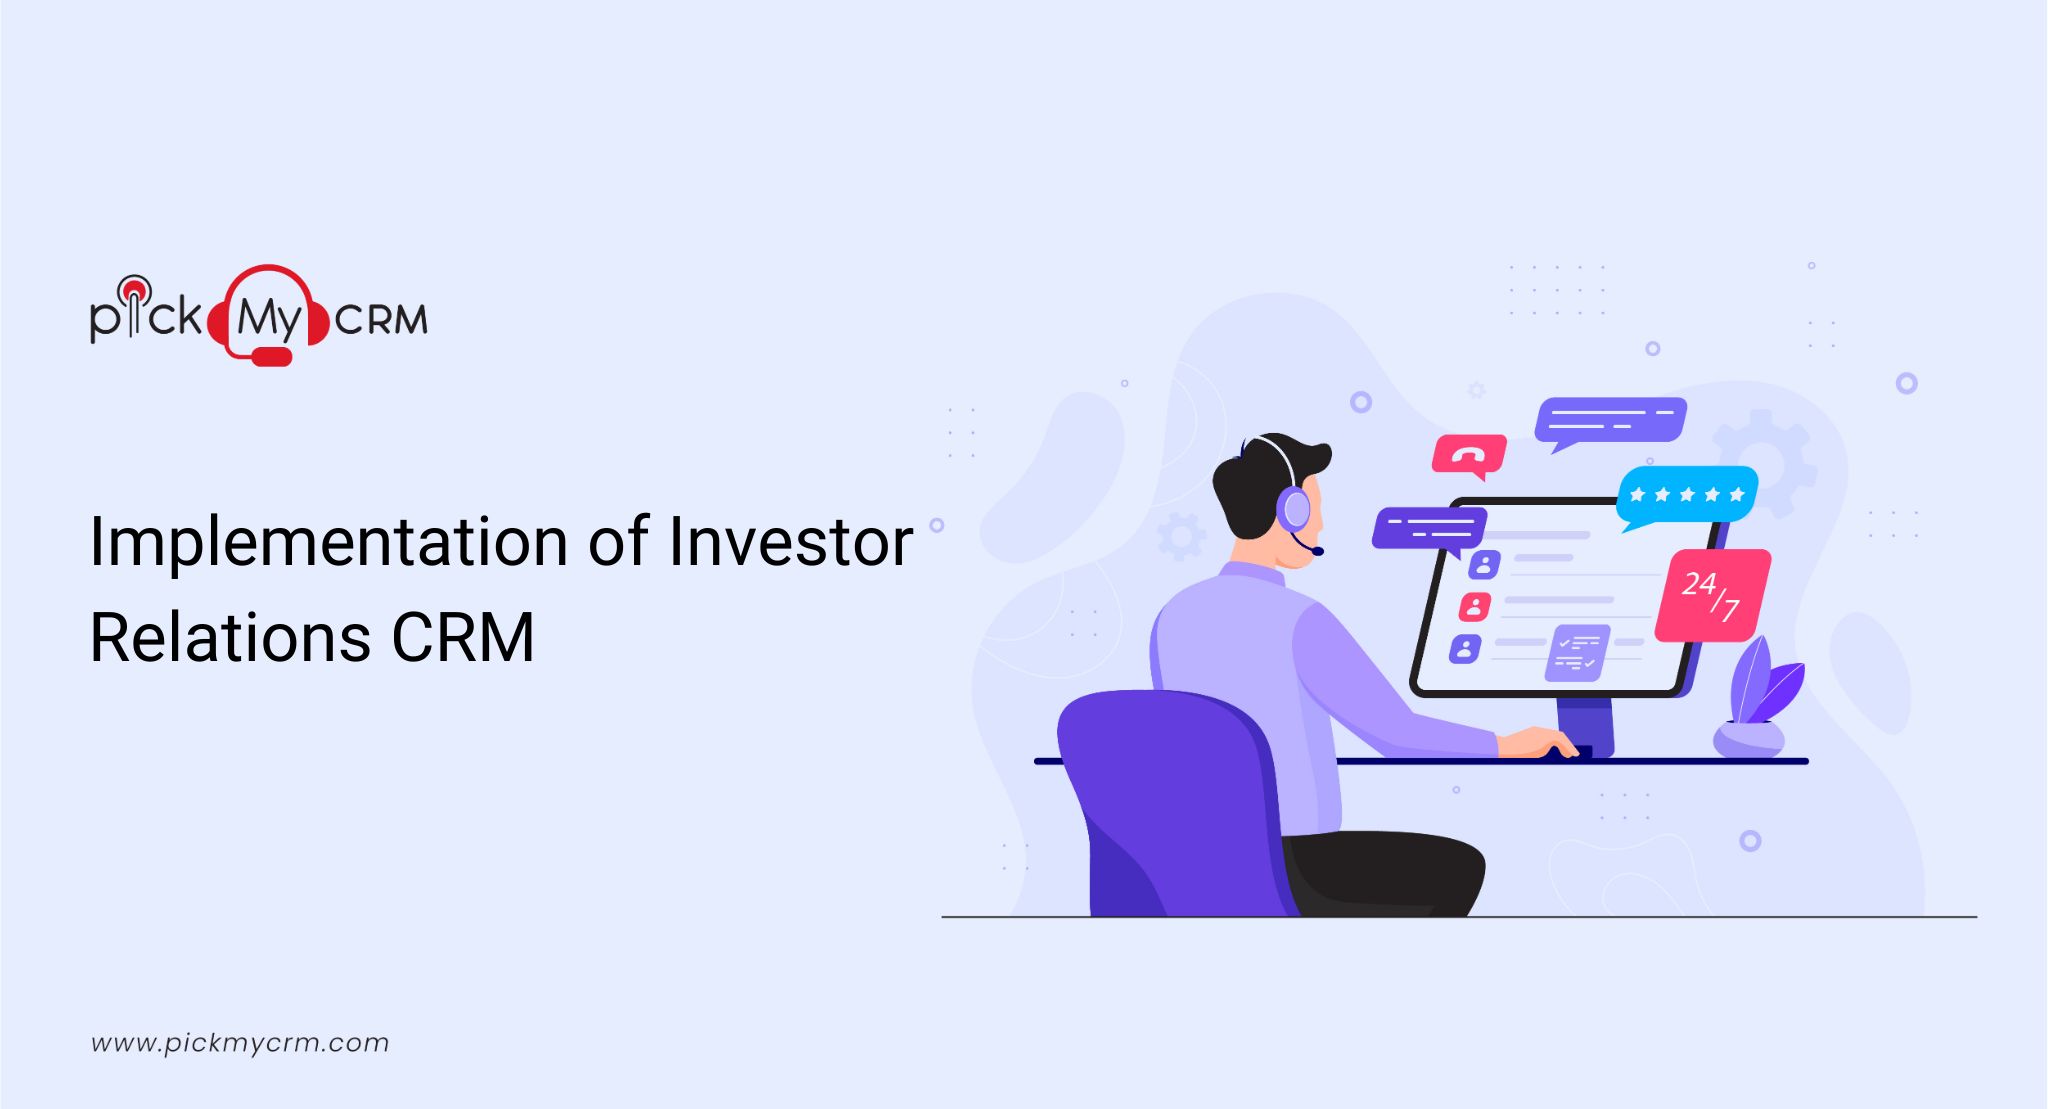 Implementation of Investor Relations CRM